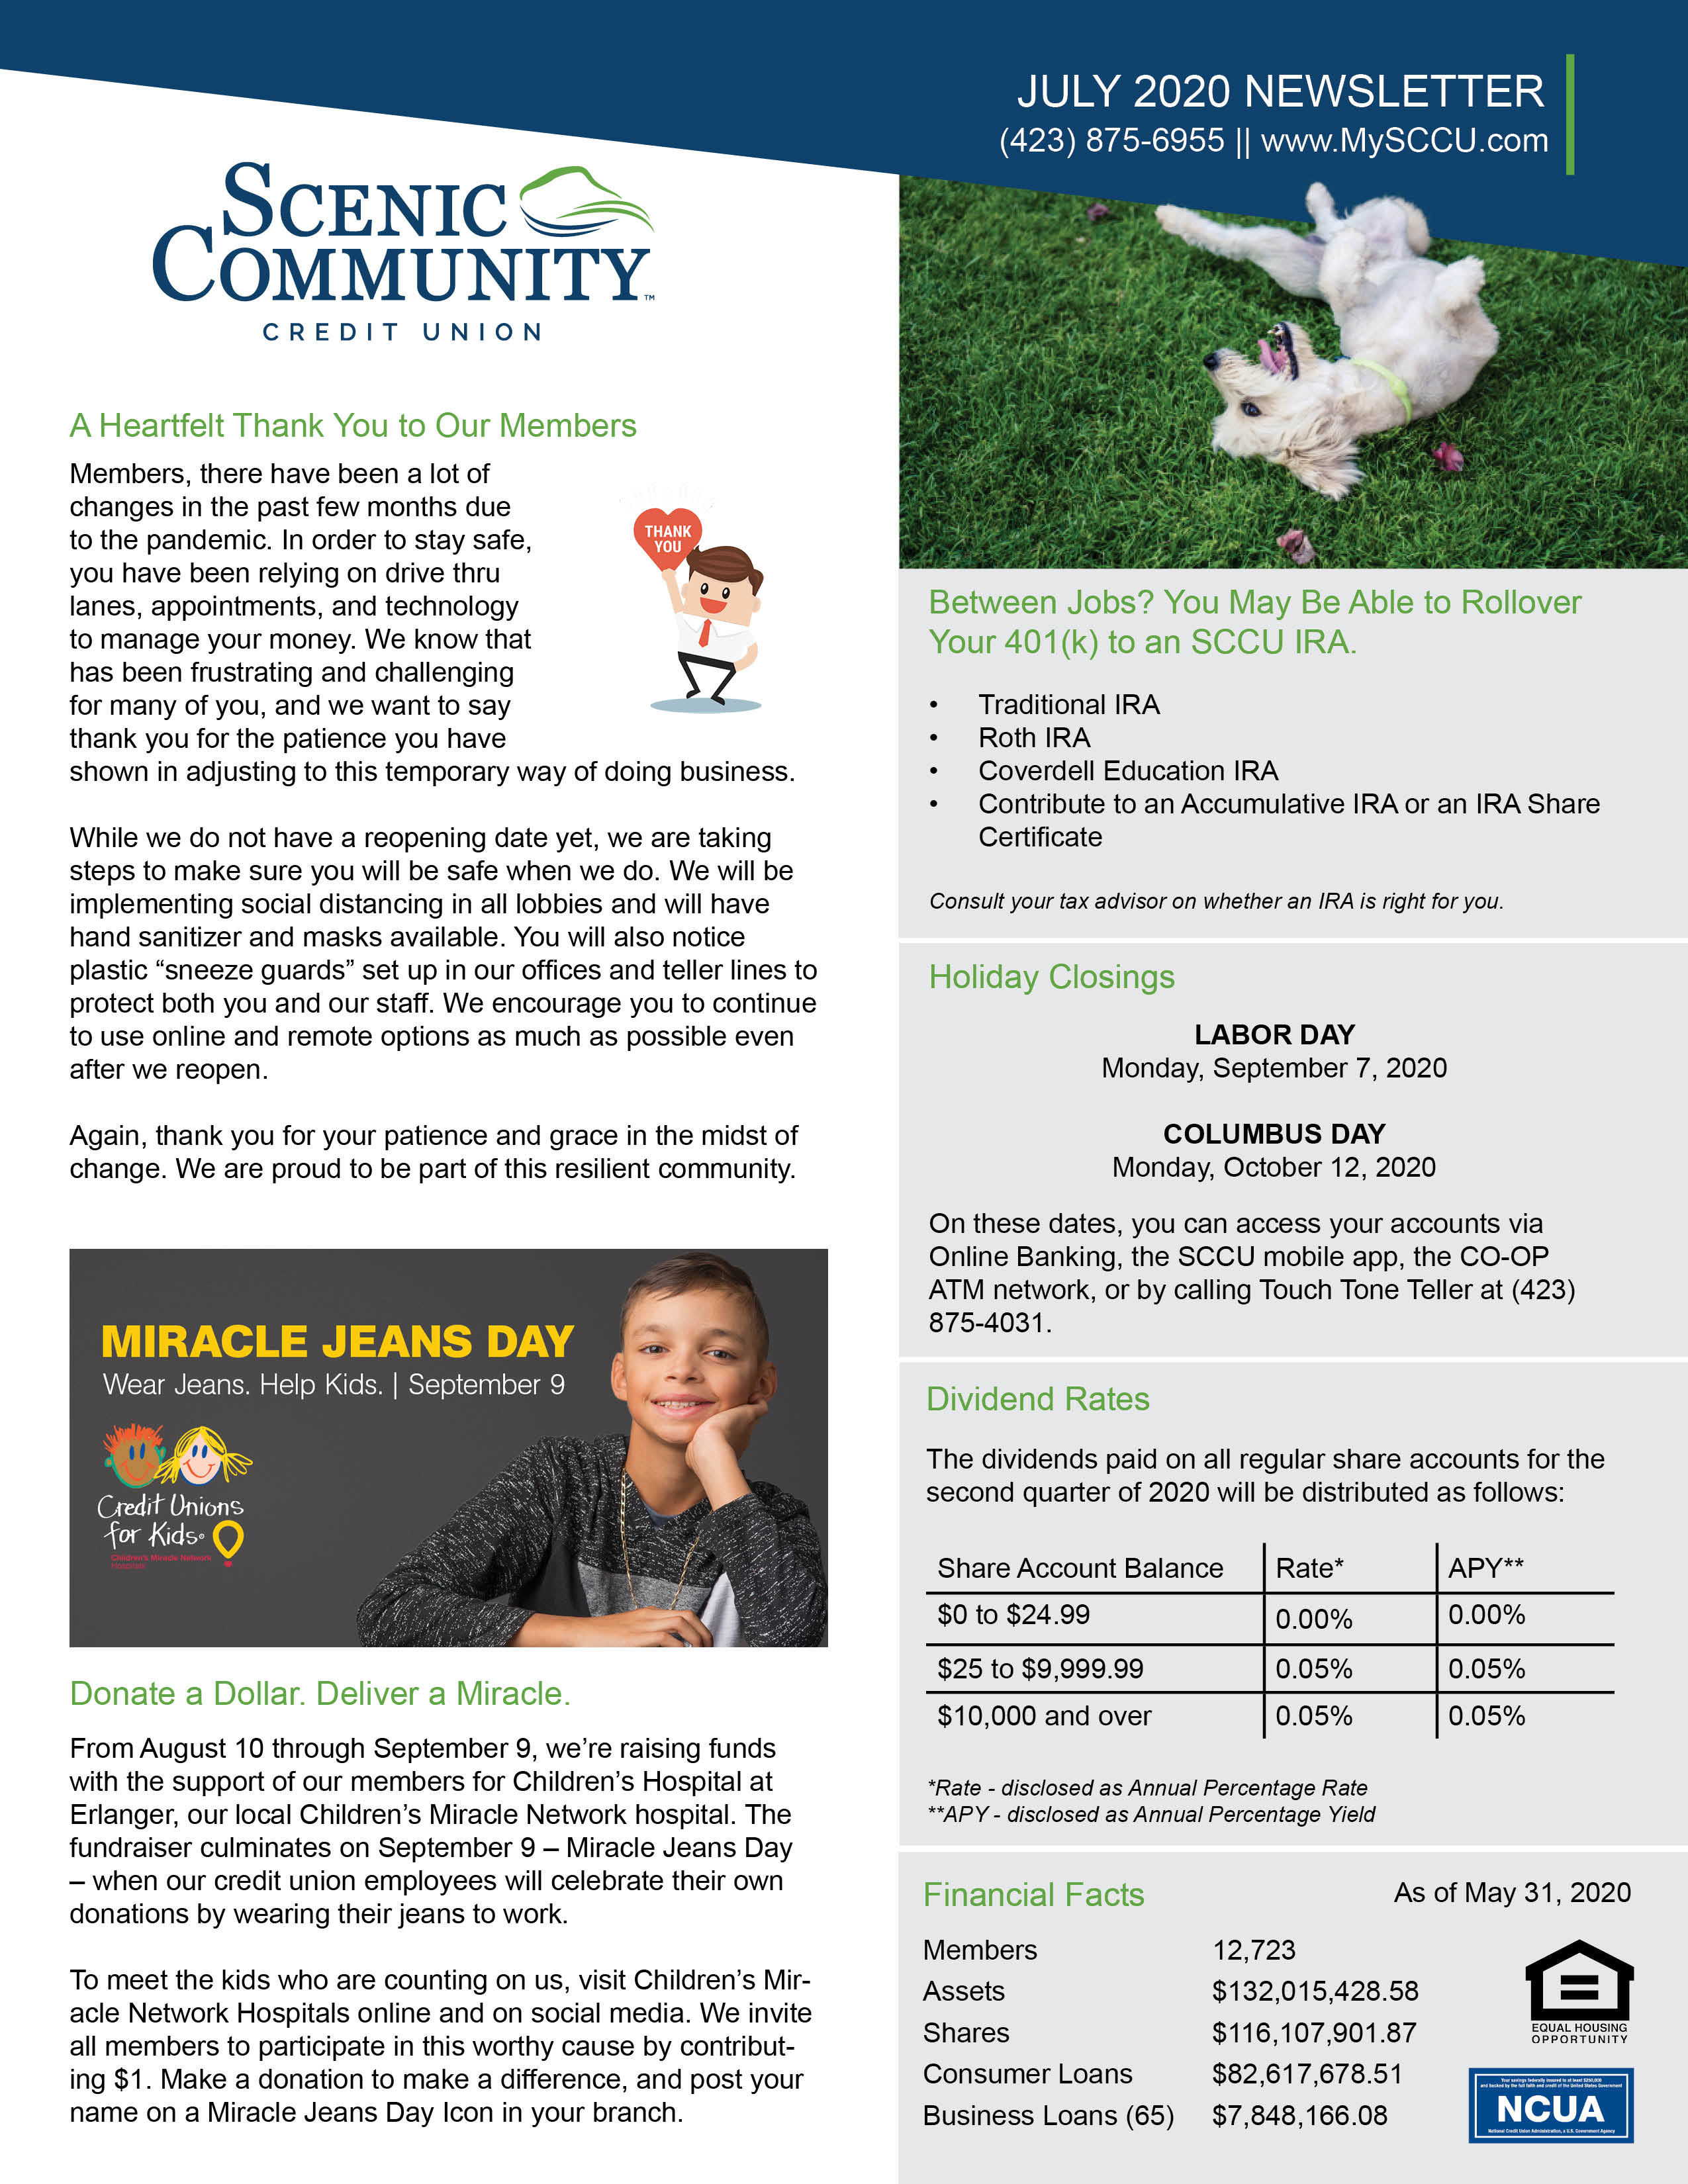 July 2020 newsletter page 1.